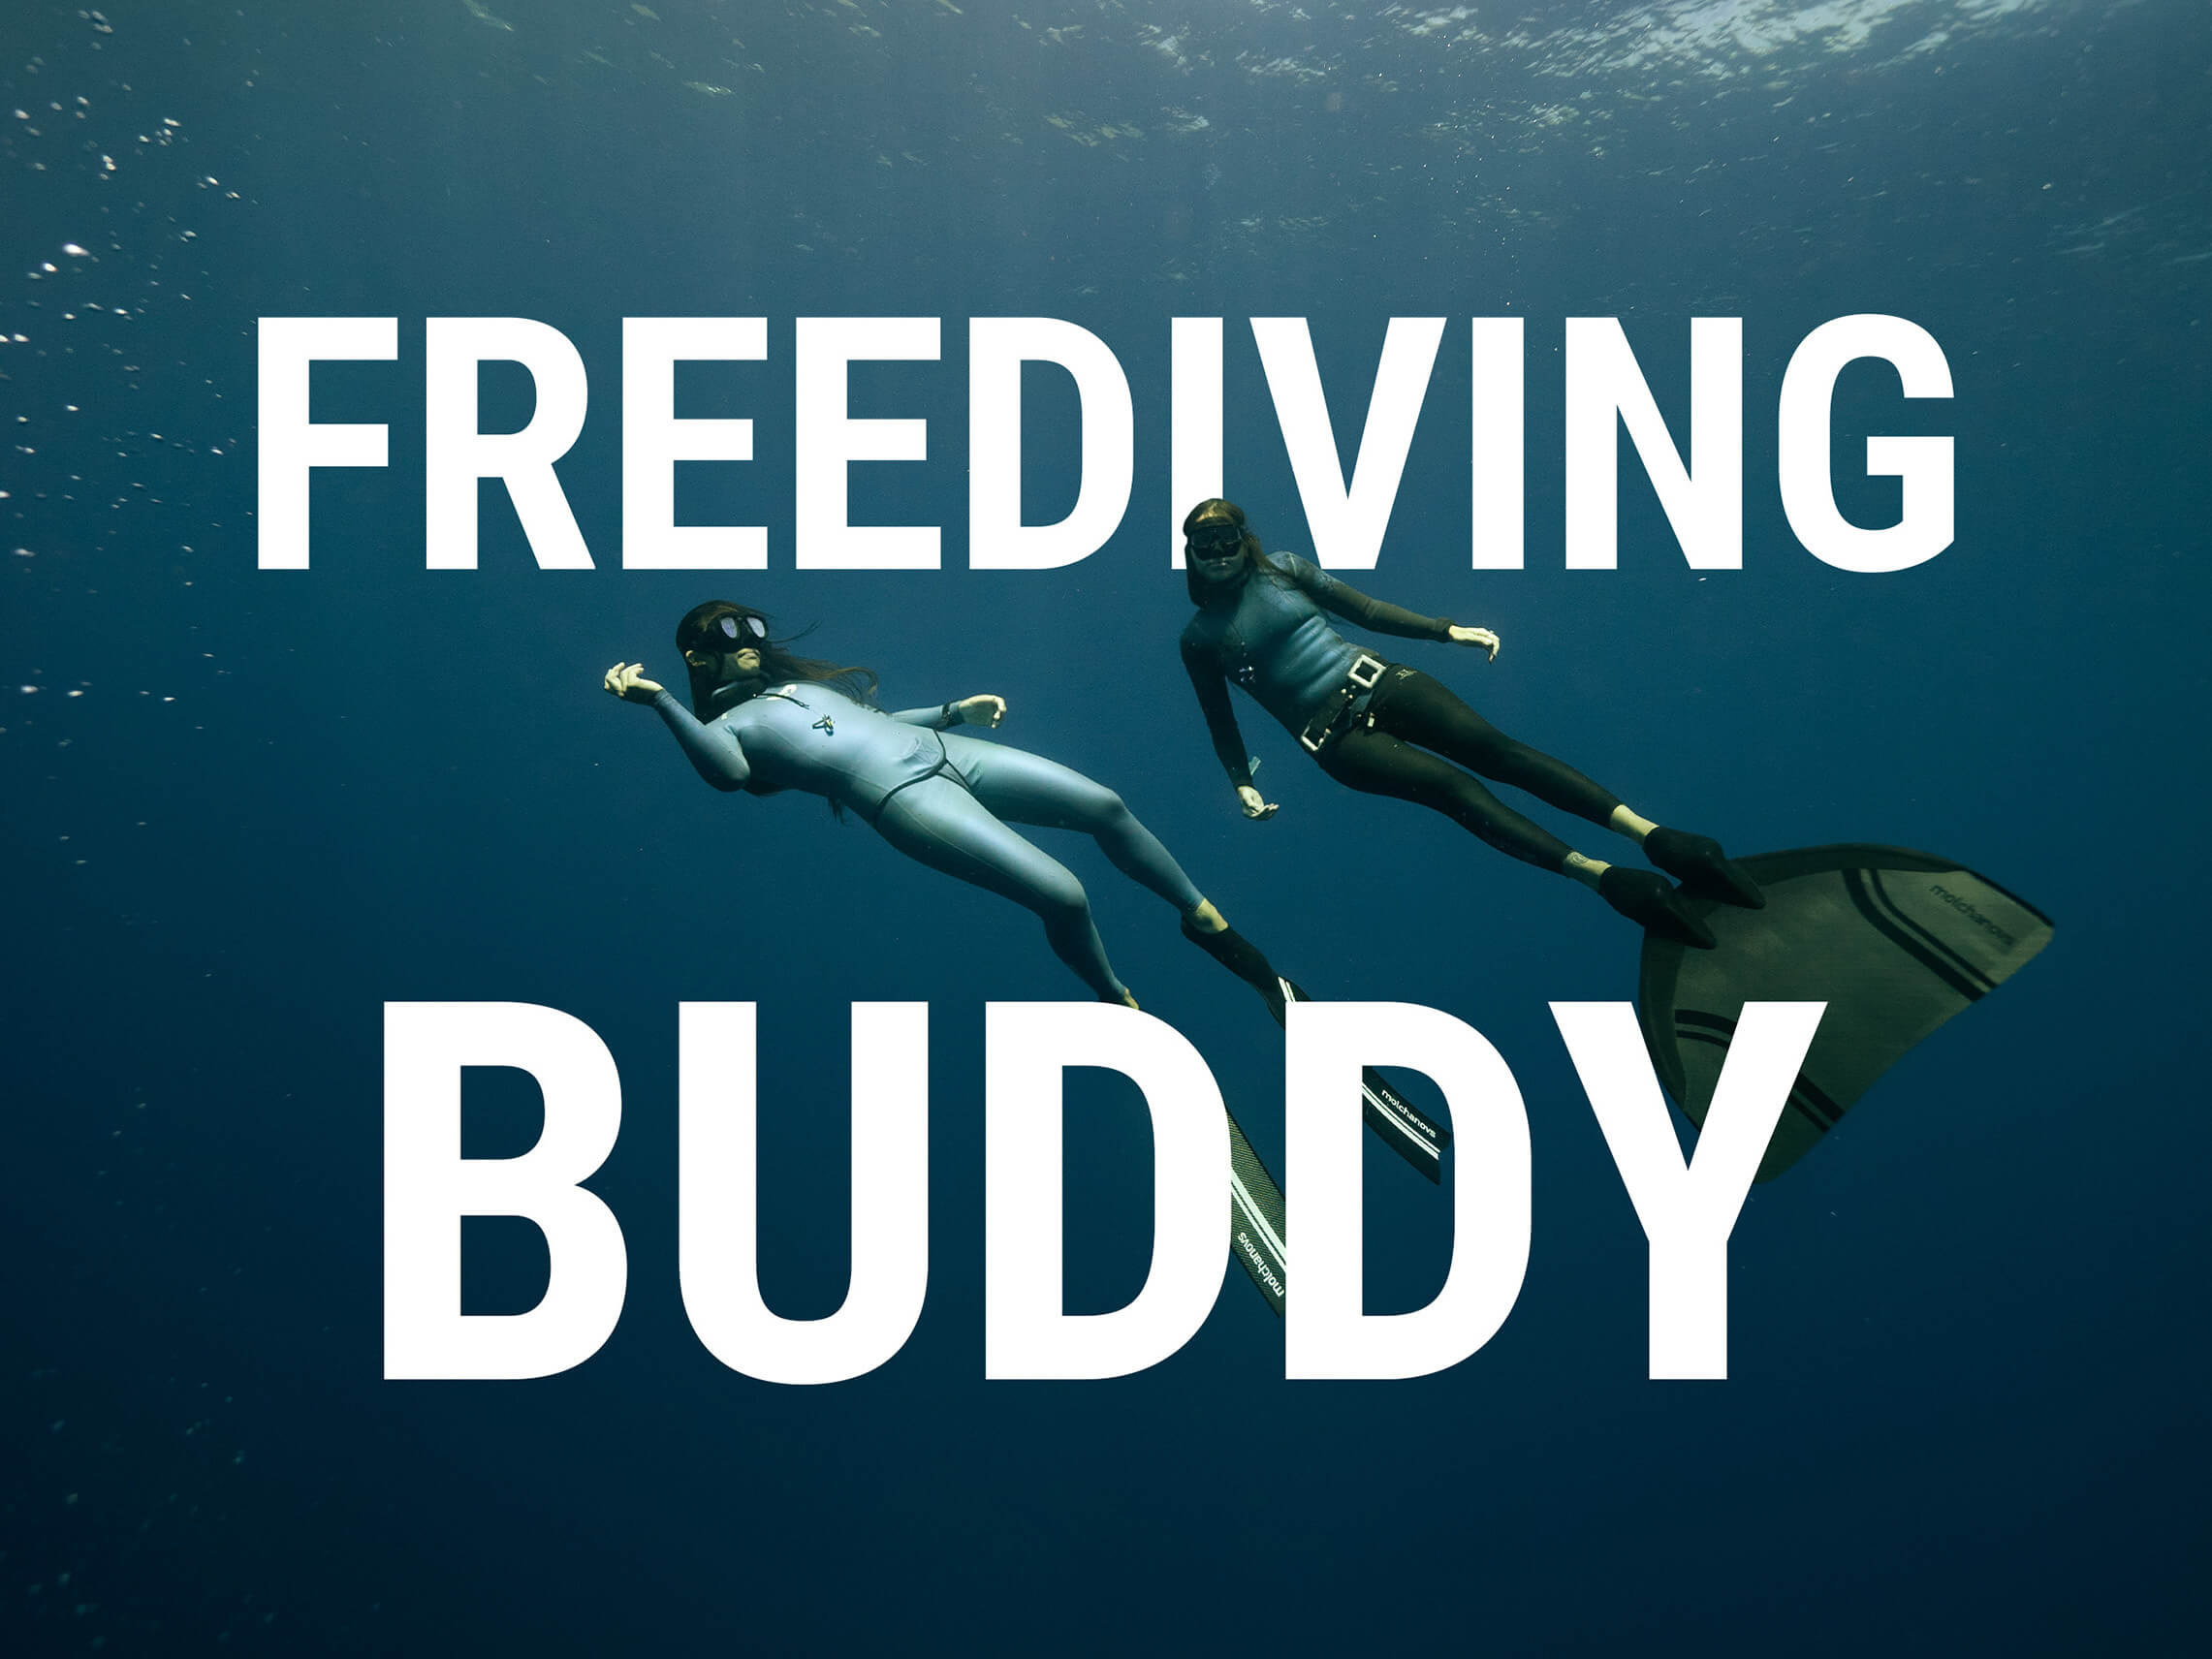 5 Things You Absolutely Need from a Freediving Buddy